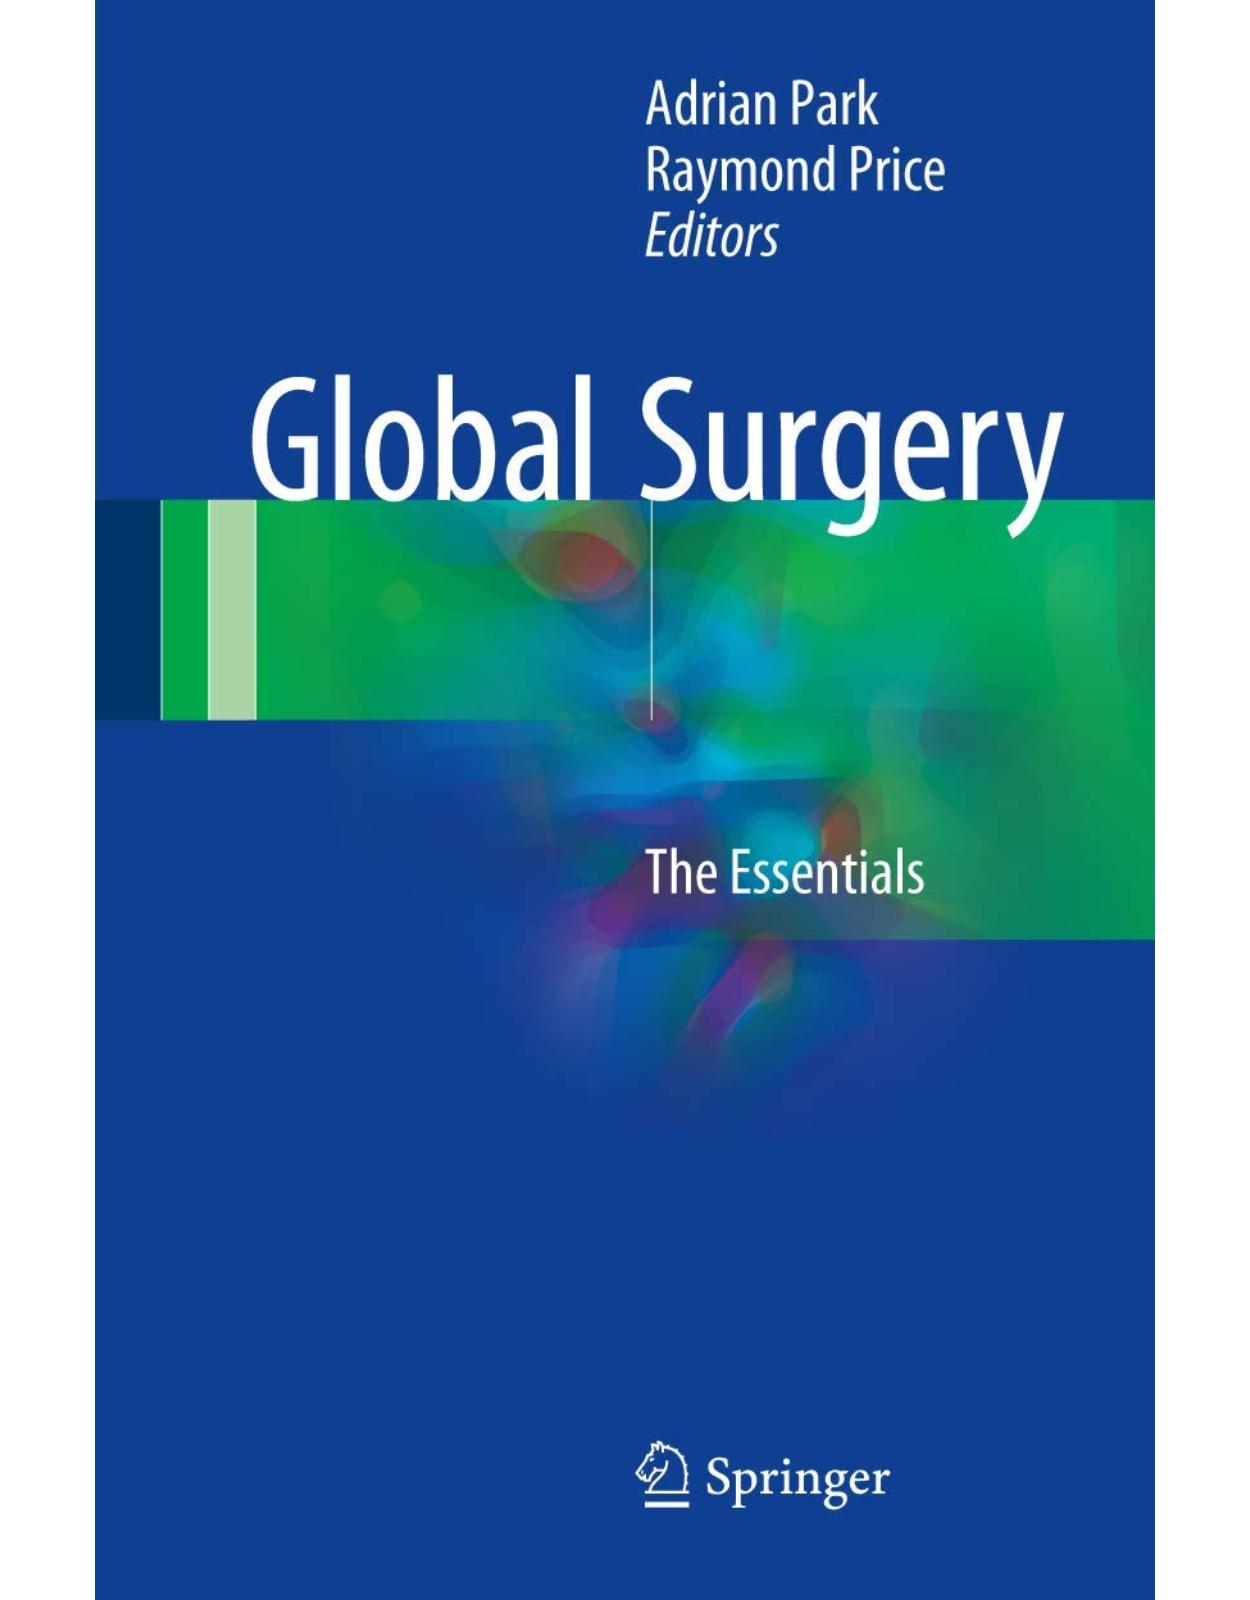 Global Surgery: The Essentials